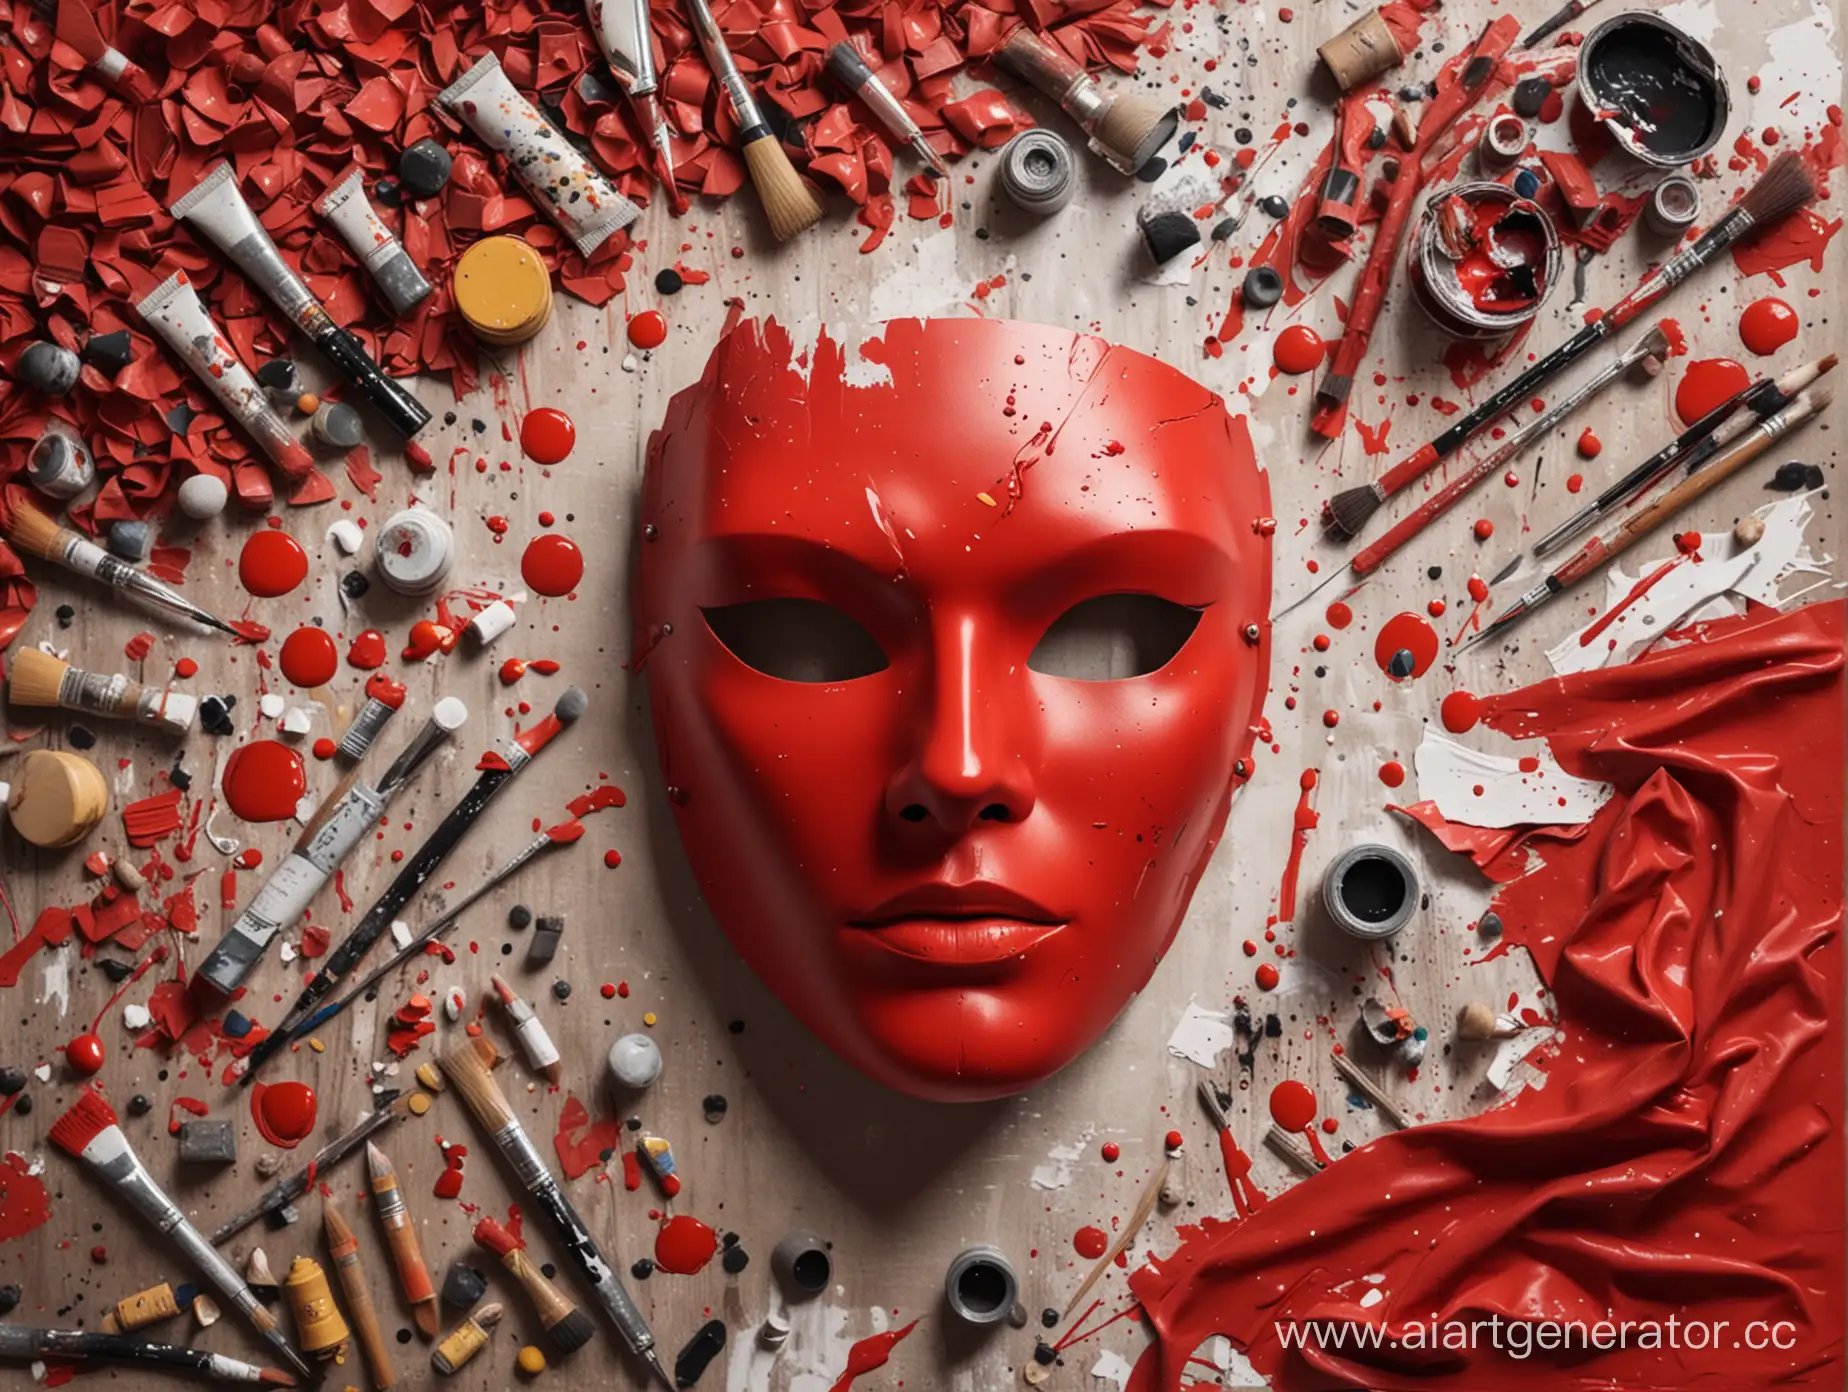 Realistic-Red-Mask-Amidst-Miscellaneous-Items-on-Cramped-Table